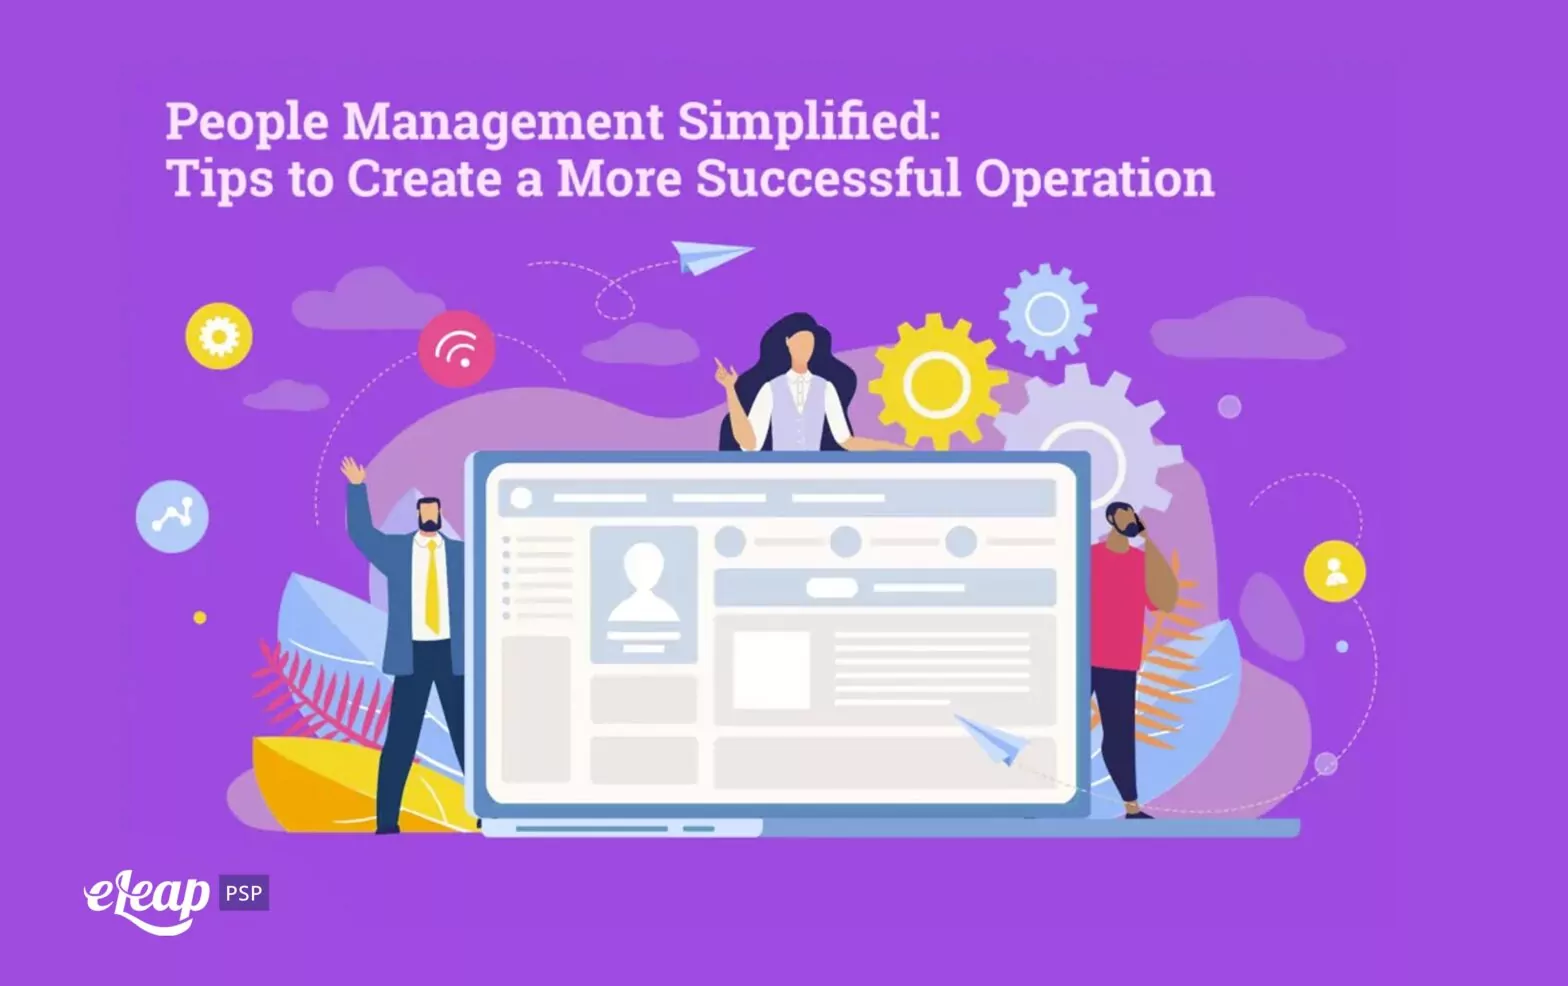 People Management Simplified: Tips to Create a More Successful Operation